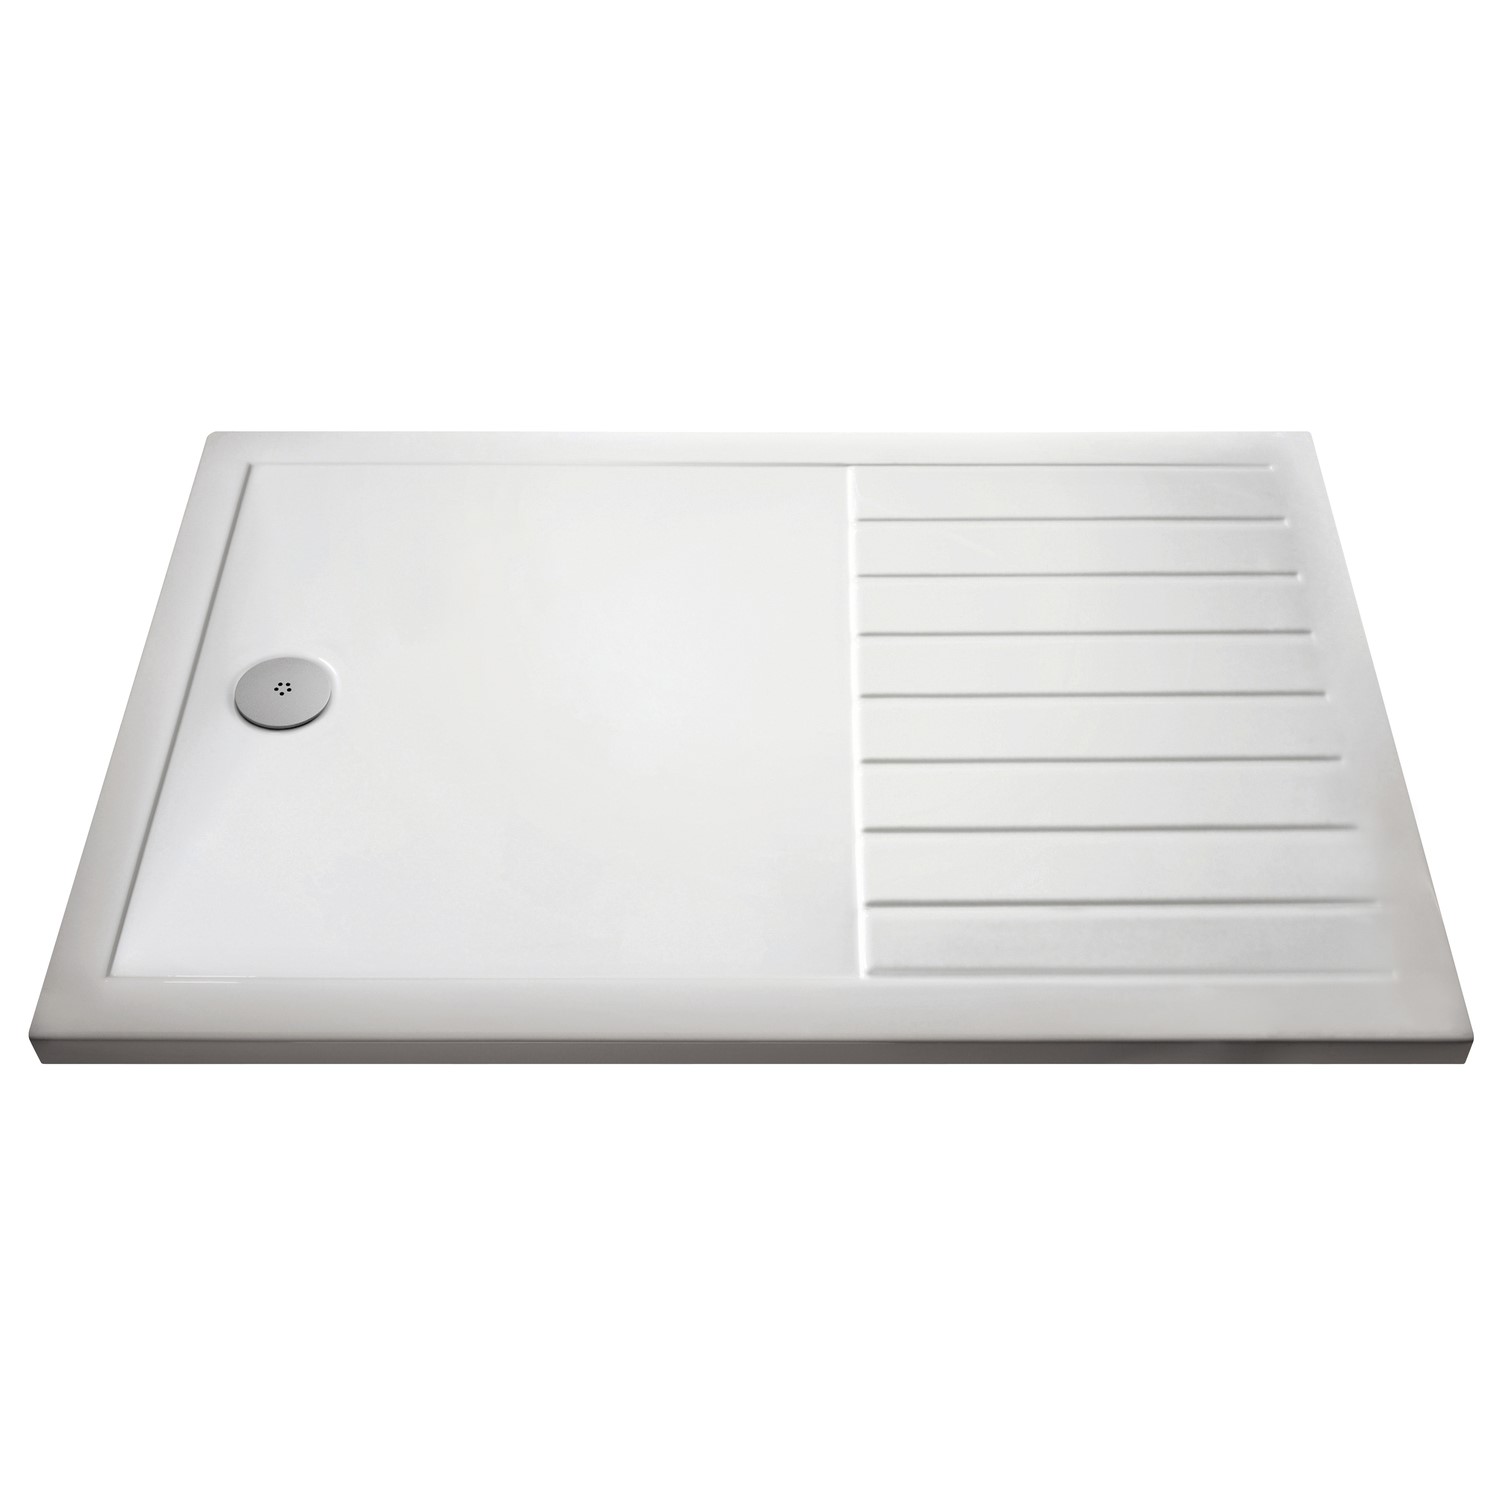 Low Profile Rectangular Walk In Shower Tray 1400 x 800mm - Purity